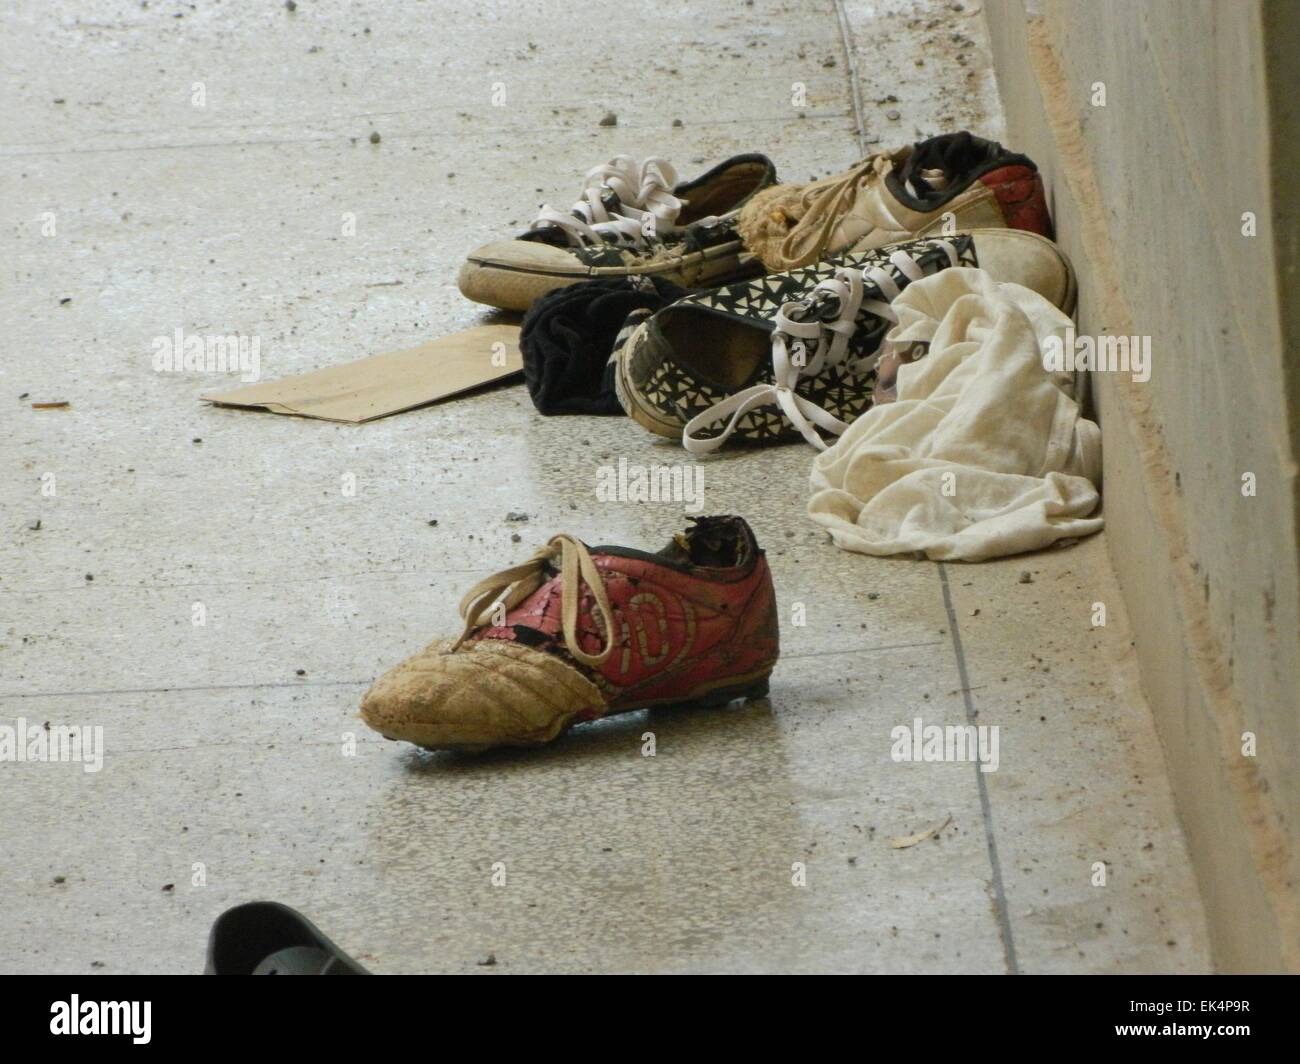 Garissa. 6th Apr, 2015. Photo taken on April 6, 2015 shows misplaced shoes after Al-Shabaab gunmen attacked the Garissa University College in Garissa, northeastern Kenya. At least 142 students, three police officers and three soldiers were killed in the massacre last week at the Garissa University College. Credit:  Stephen Ingati/Xinhua/Alamy Live News Stock Photo